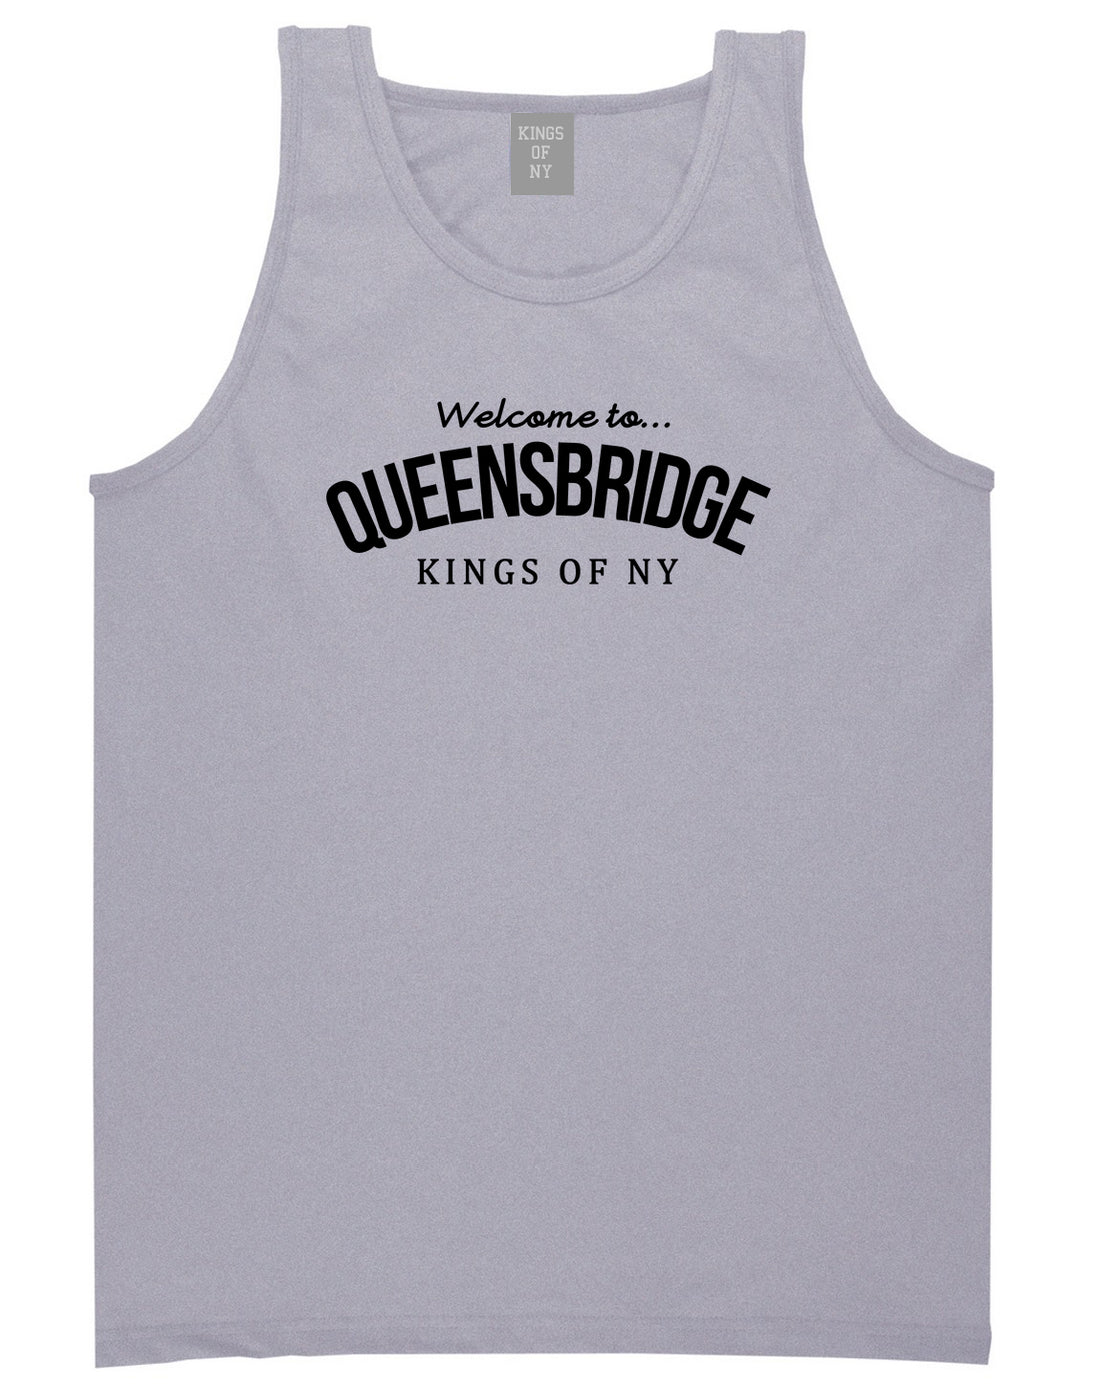 Welcome To Queensbridge Mens Tank Top Shirt Grey by Kings Of NY